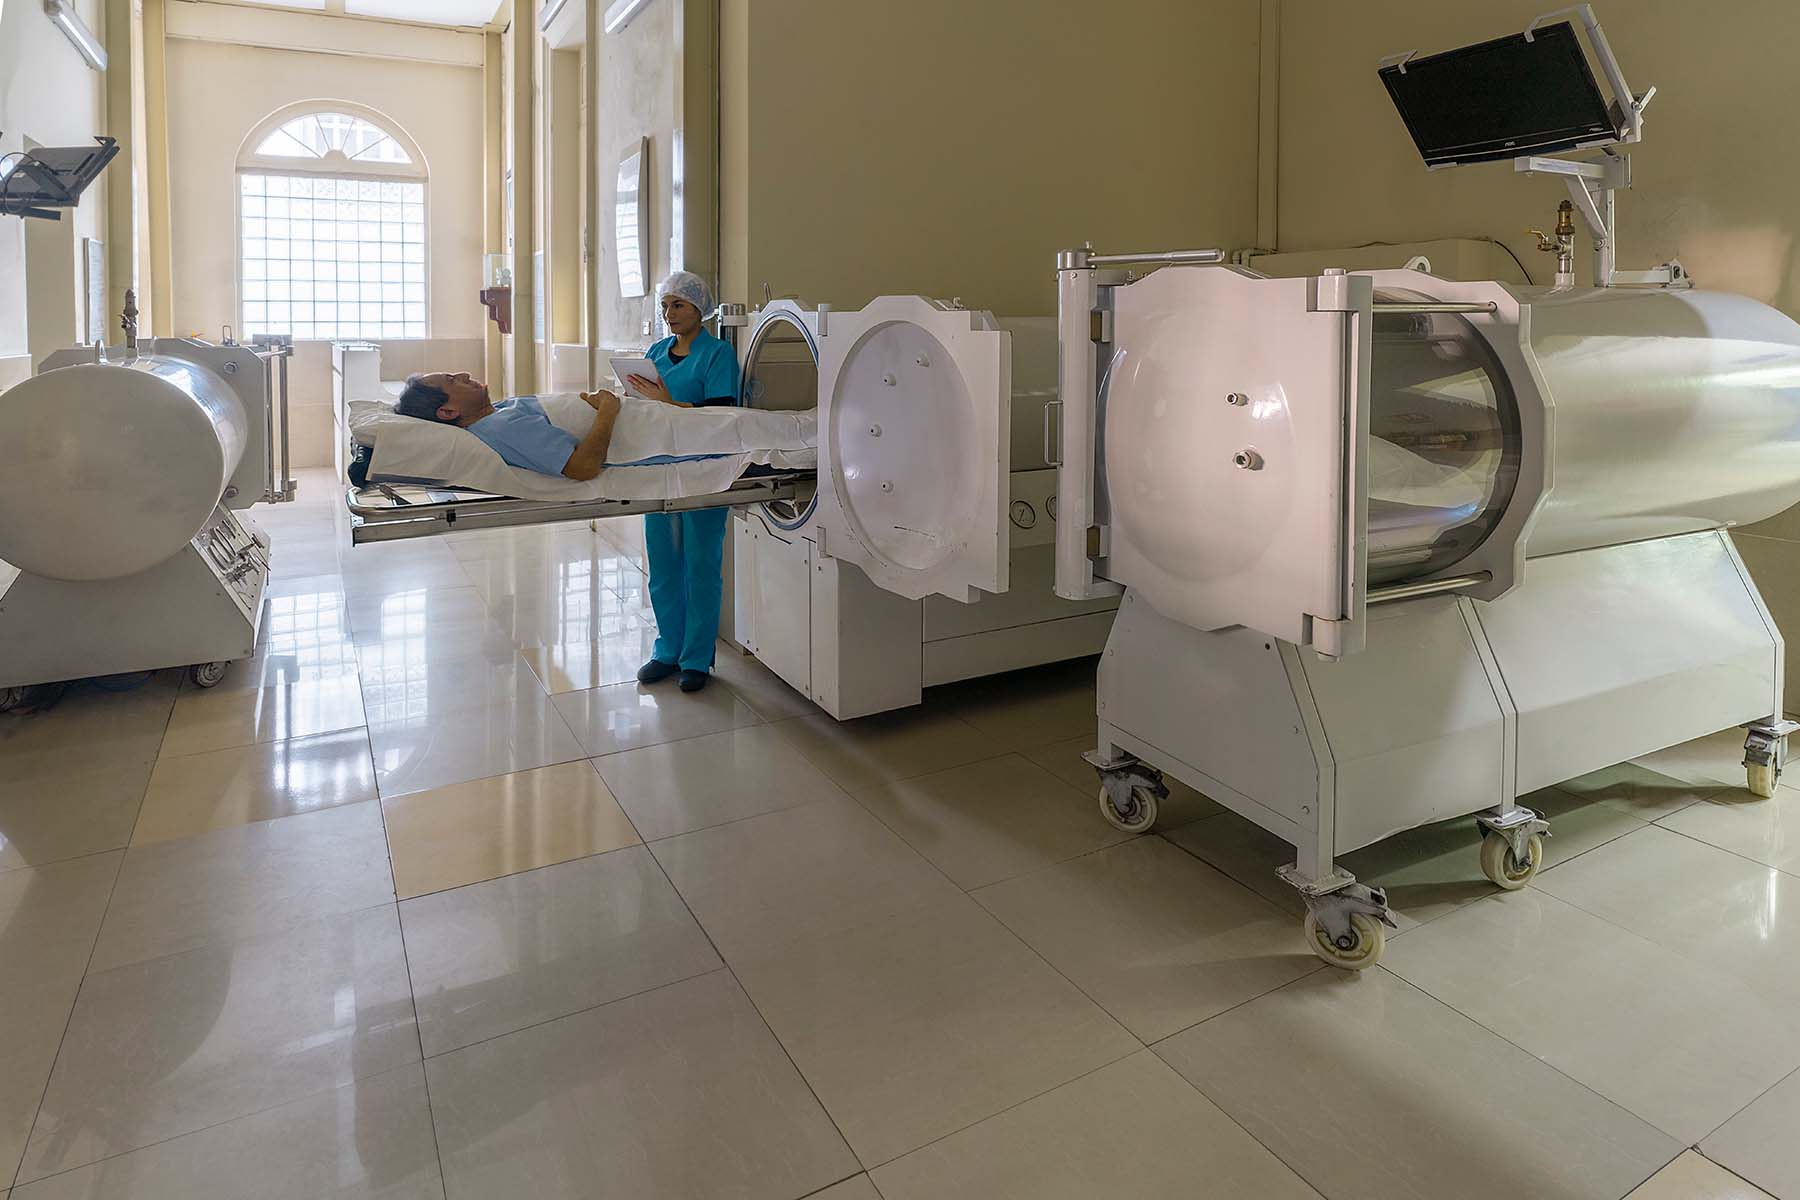 Hyperbaric chambers help patients recover. Stock image of three HCs